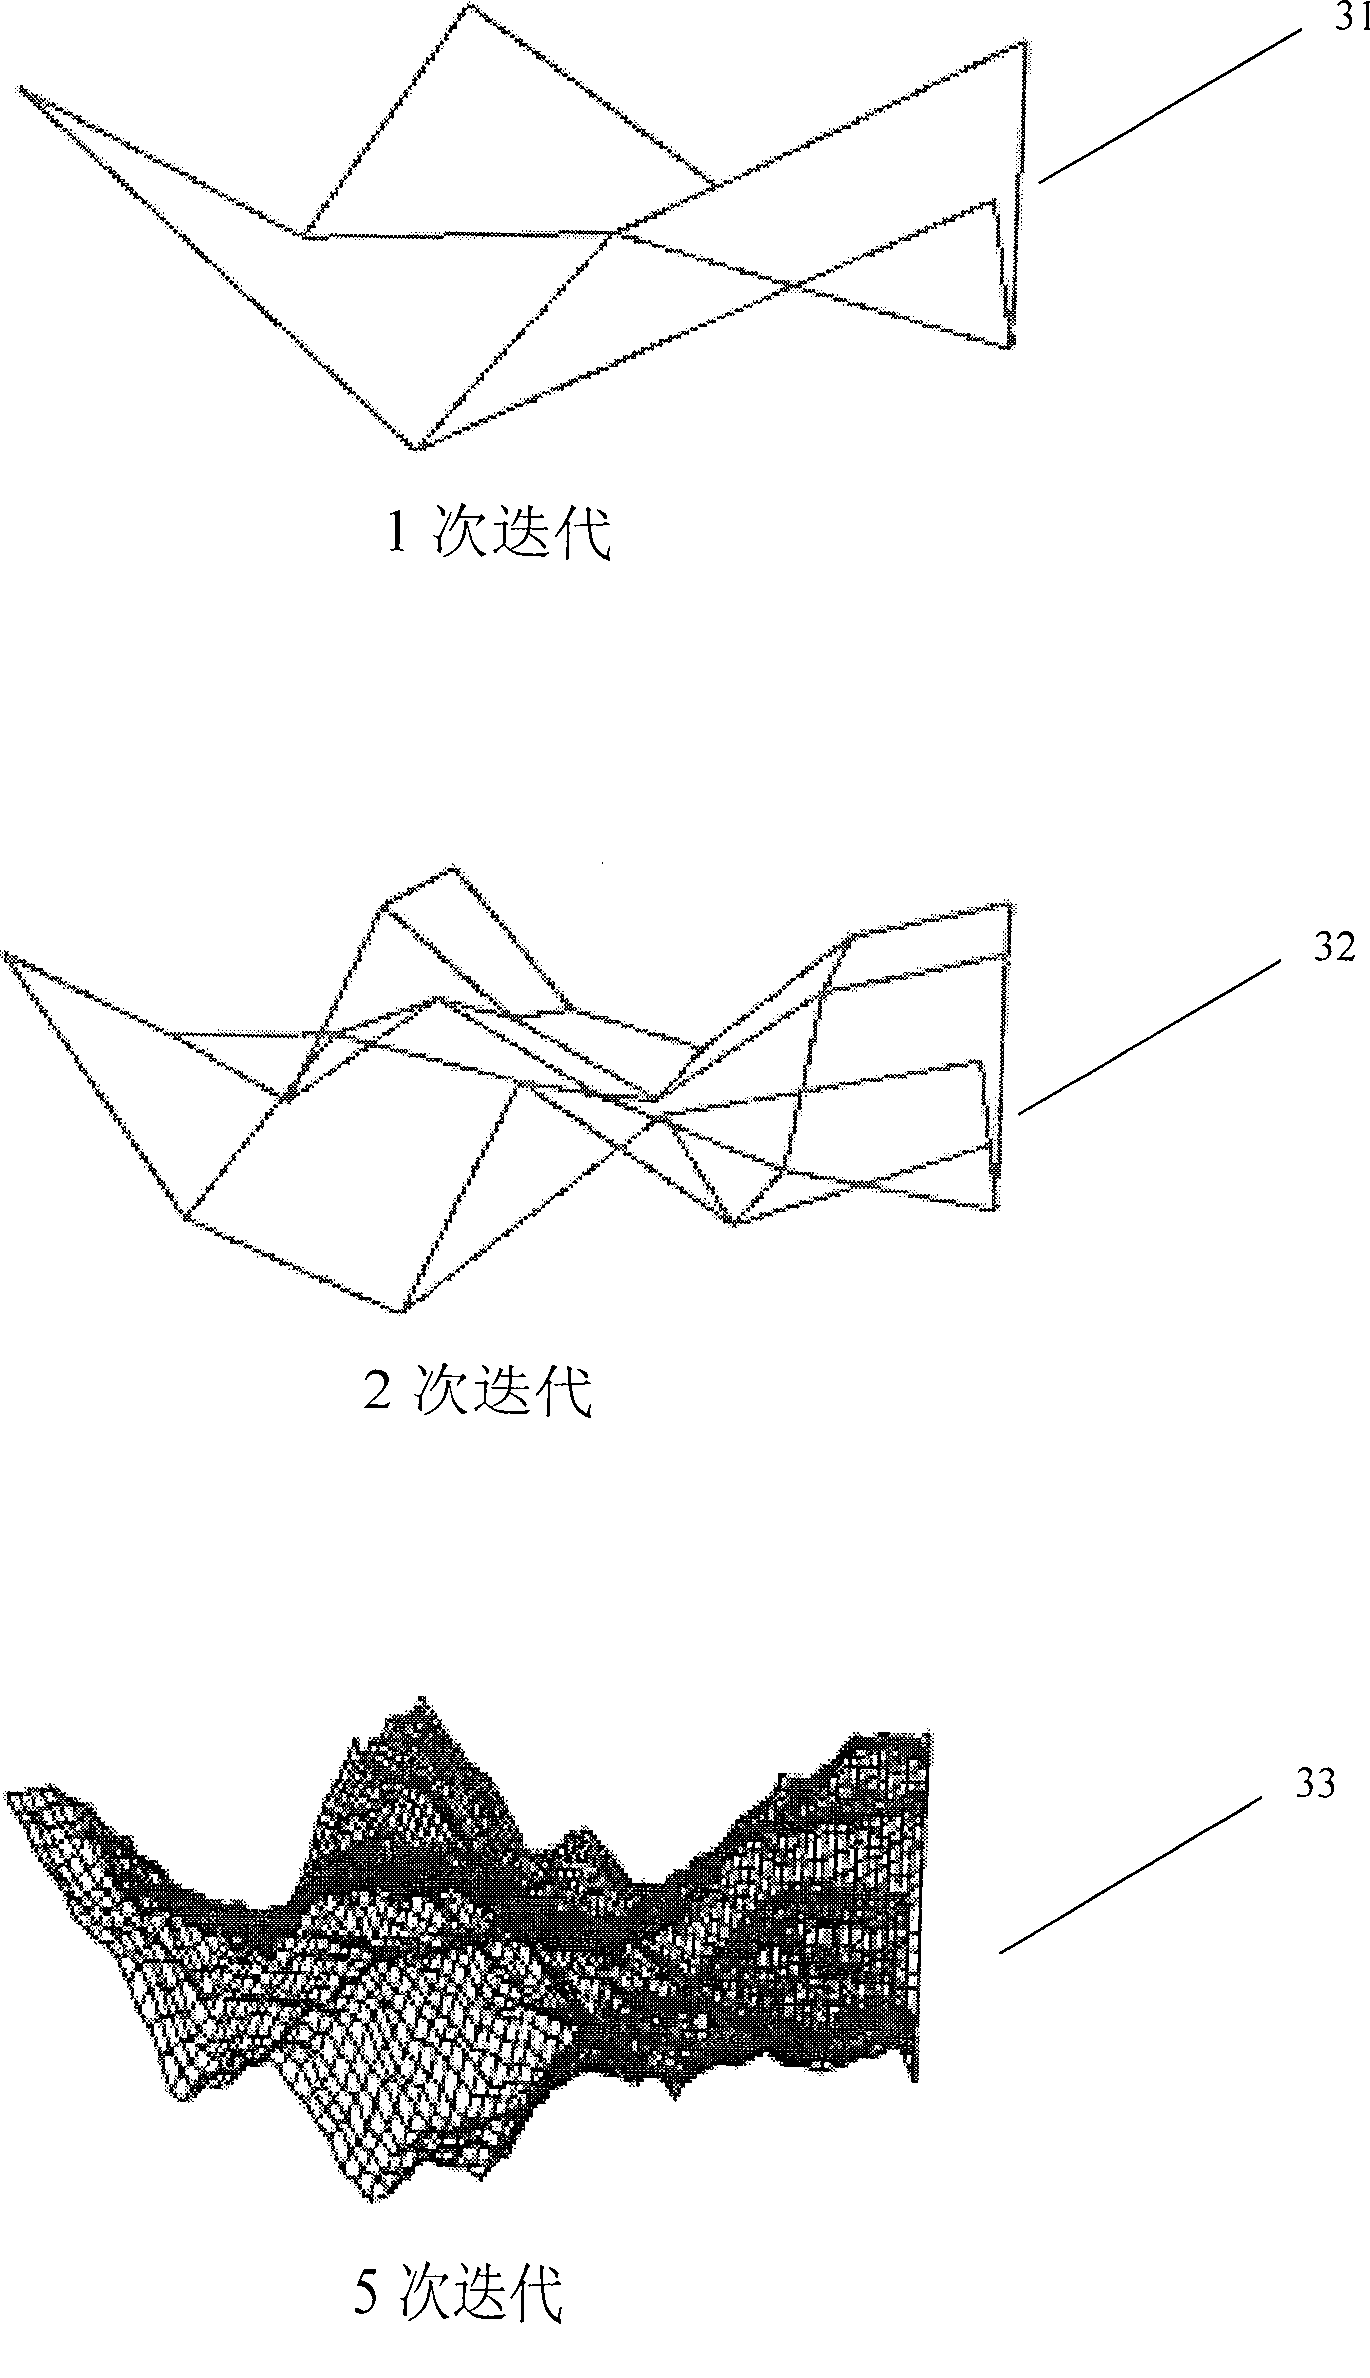 Virtual oil-layer natural simulation system and method